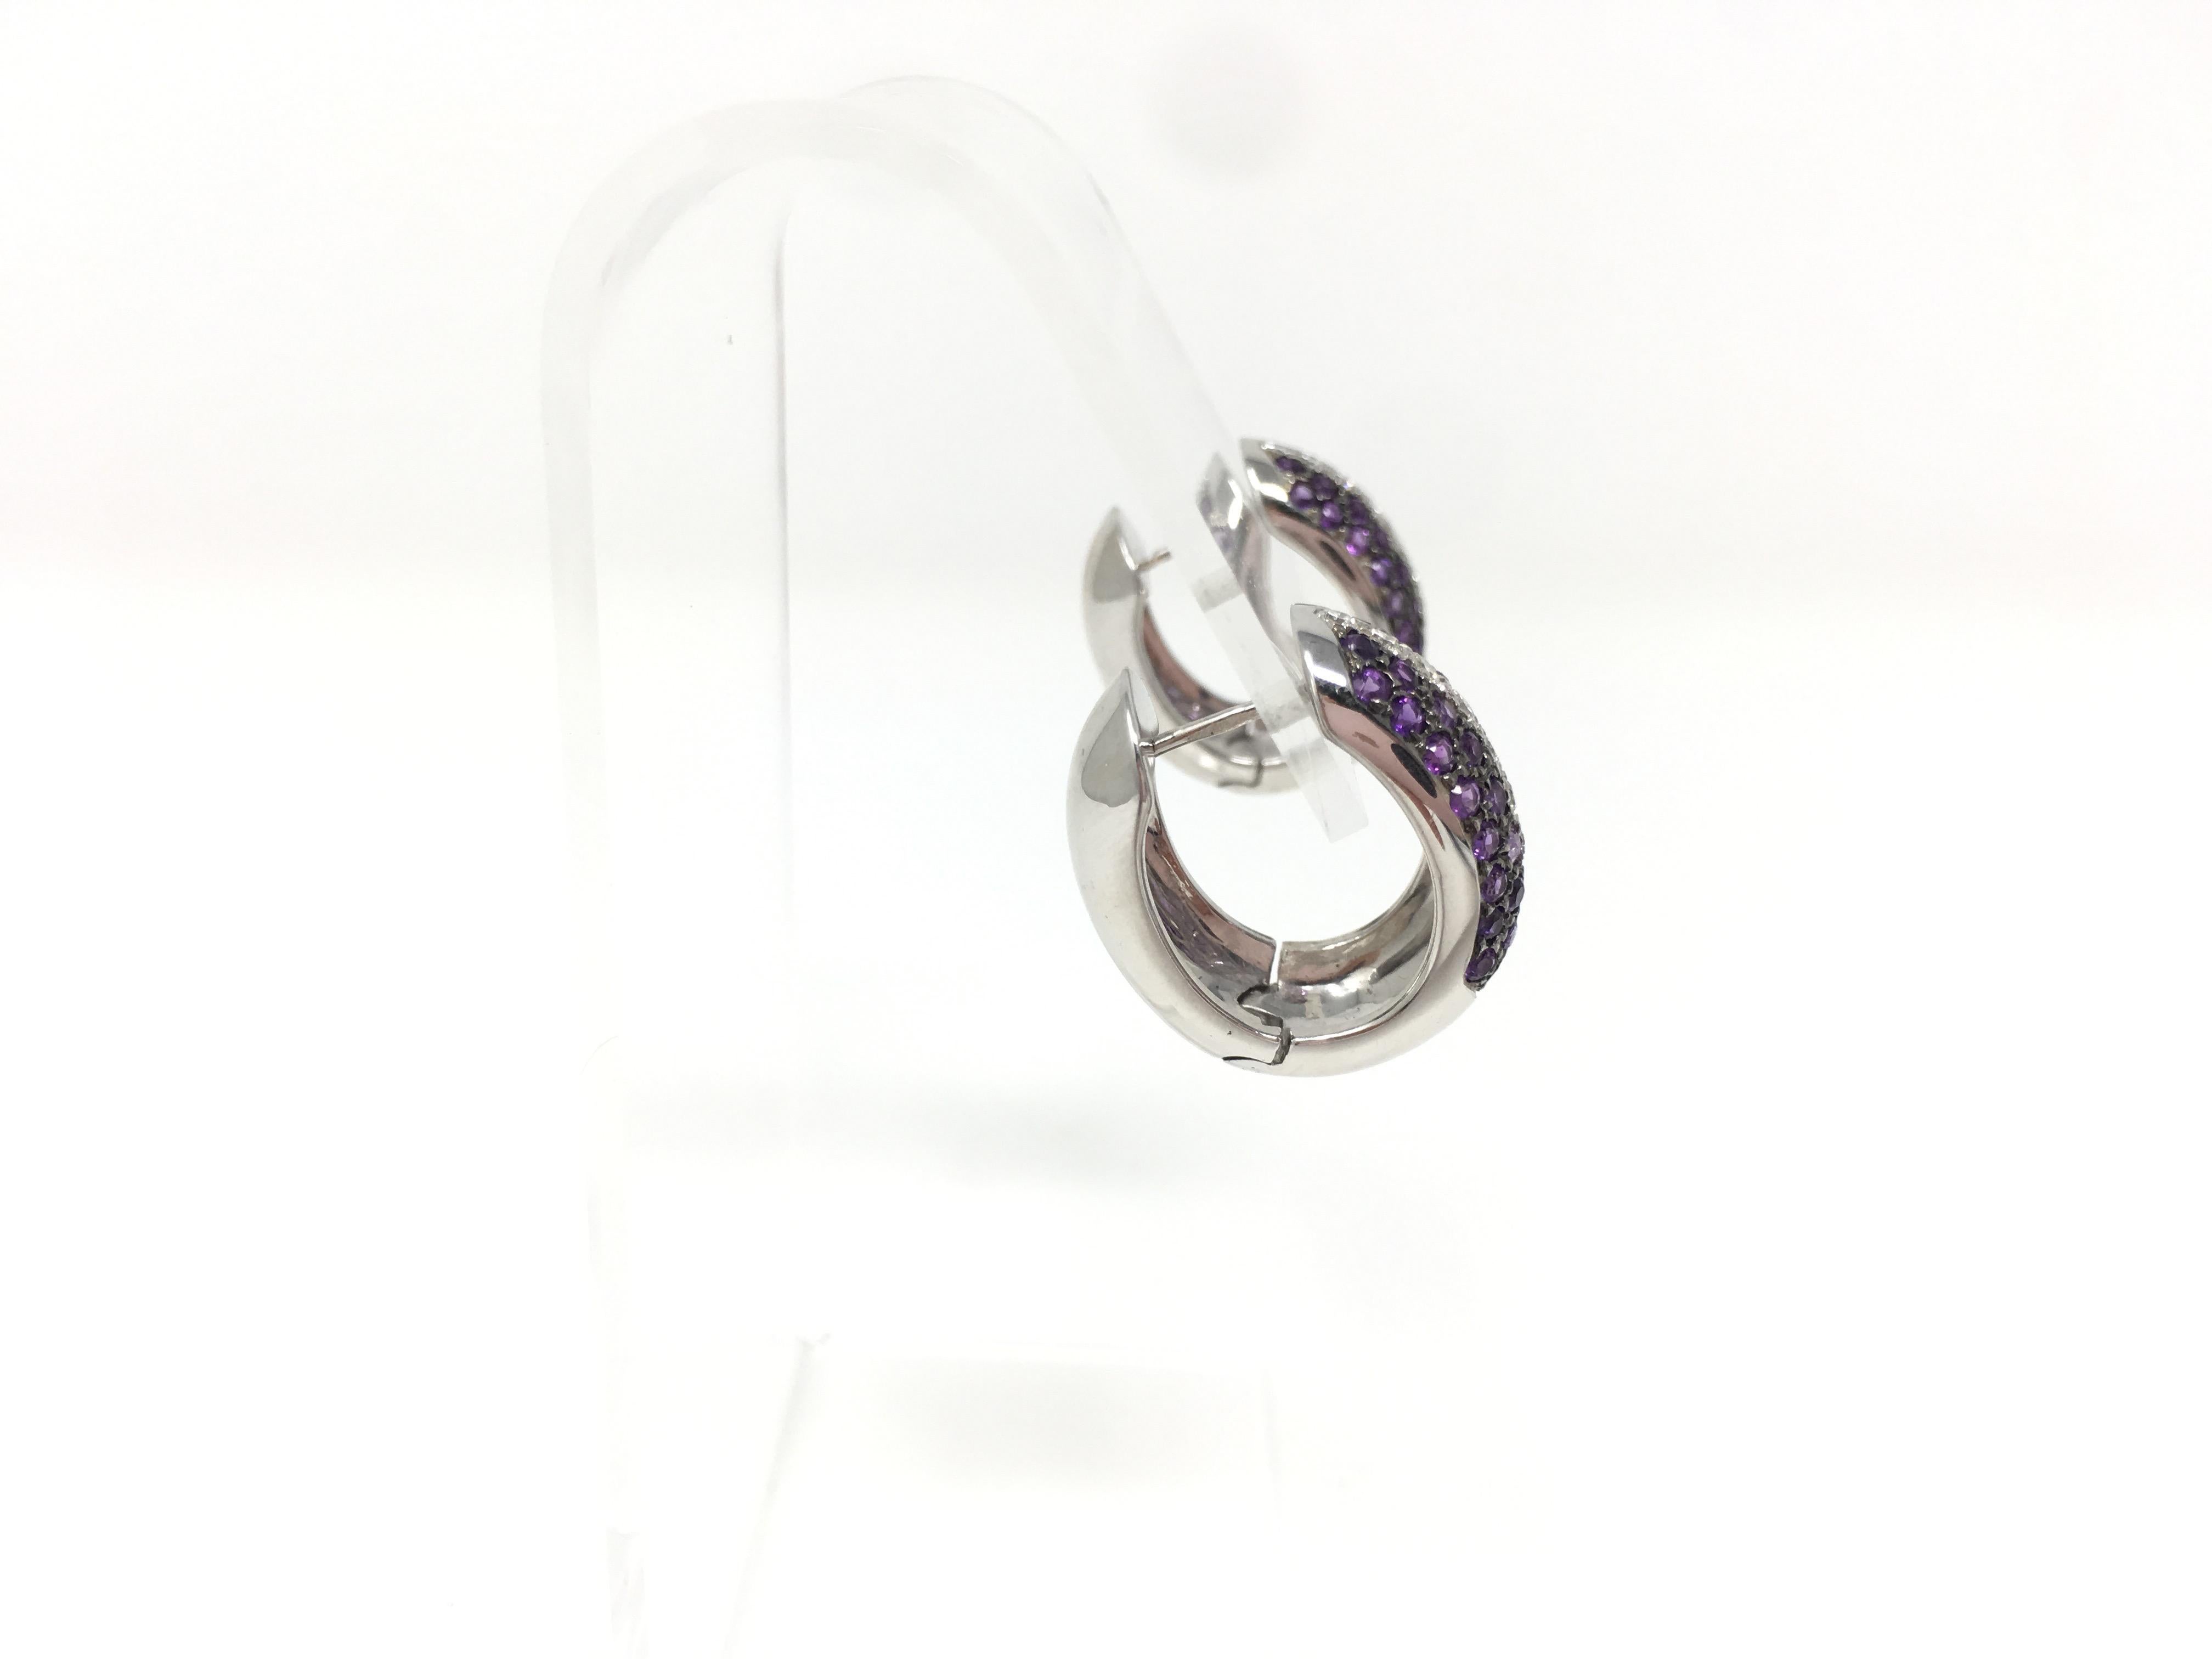 White Round Brilliant Diamond and Amethyst Hoop Earrings in 18 Karat White Gold For Sale 3